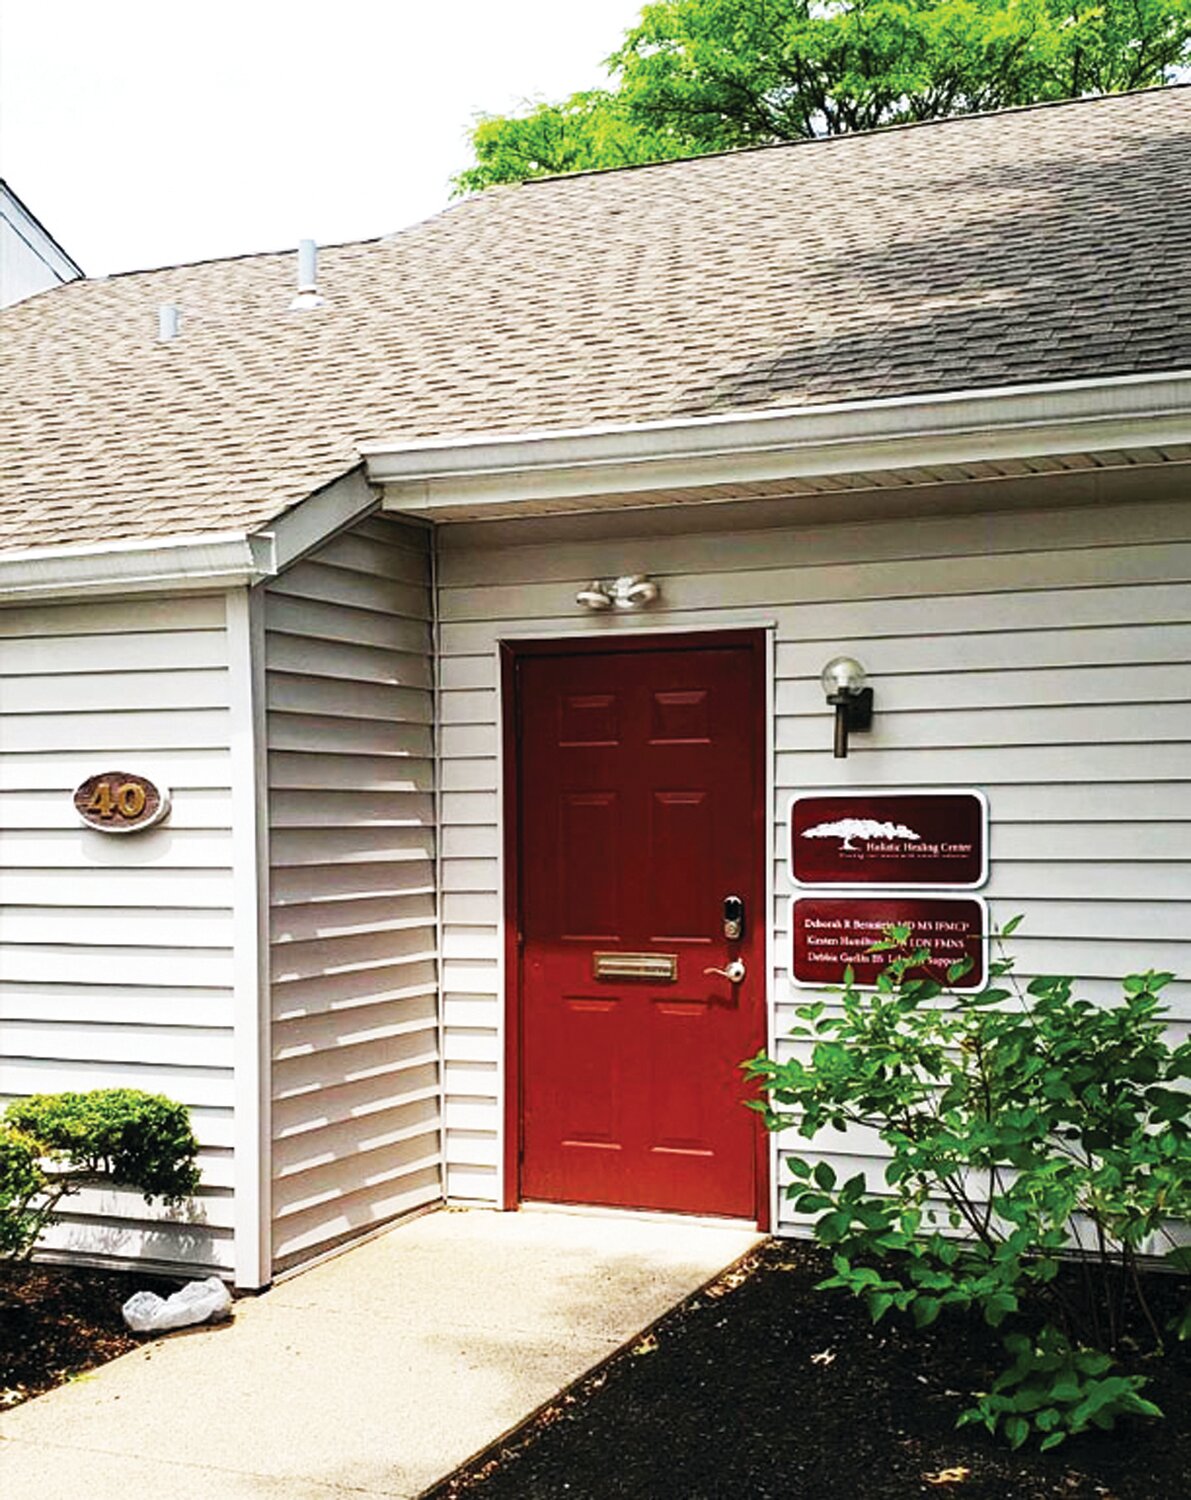 The Holistic Healing Center’s new home is located at 252 W. Swamp Road, Suite 40, Doylestown.